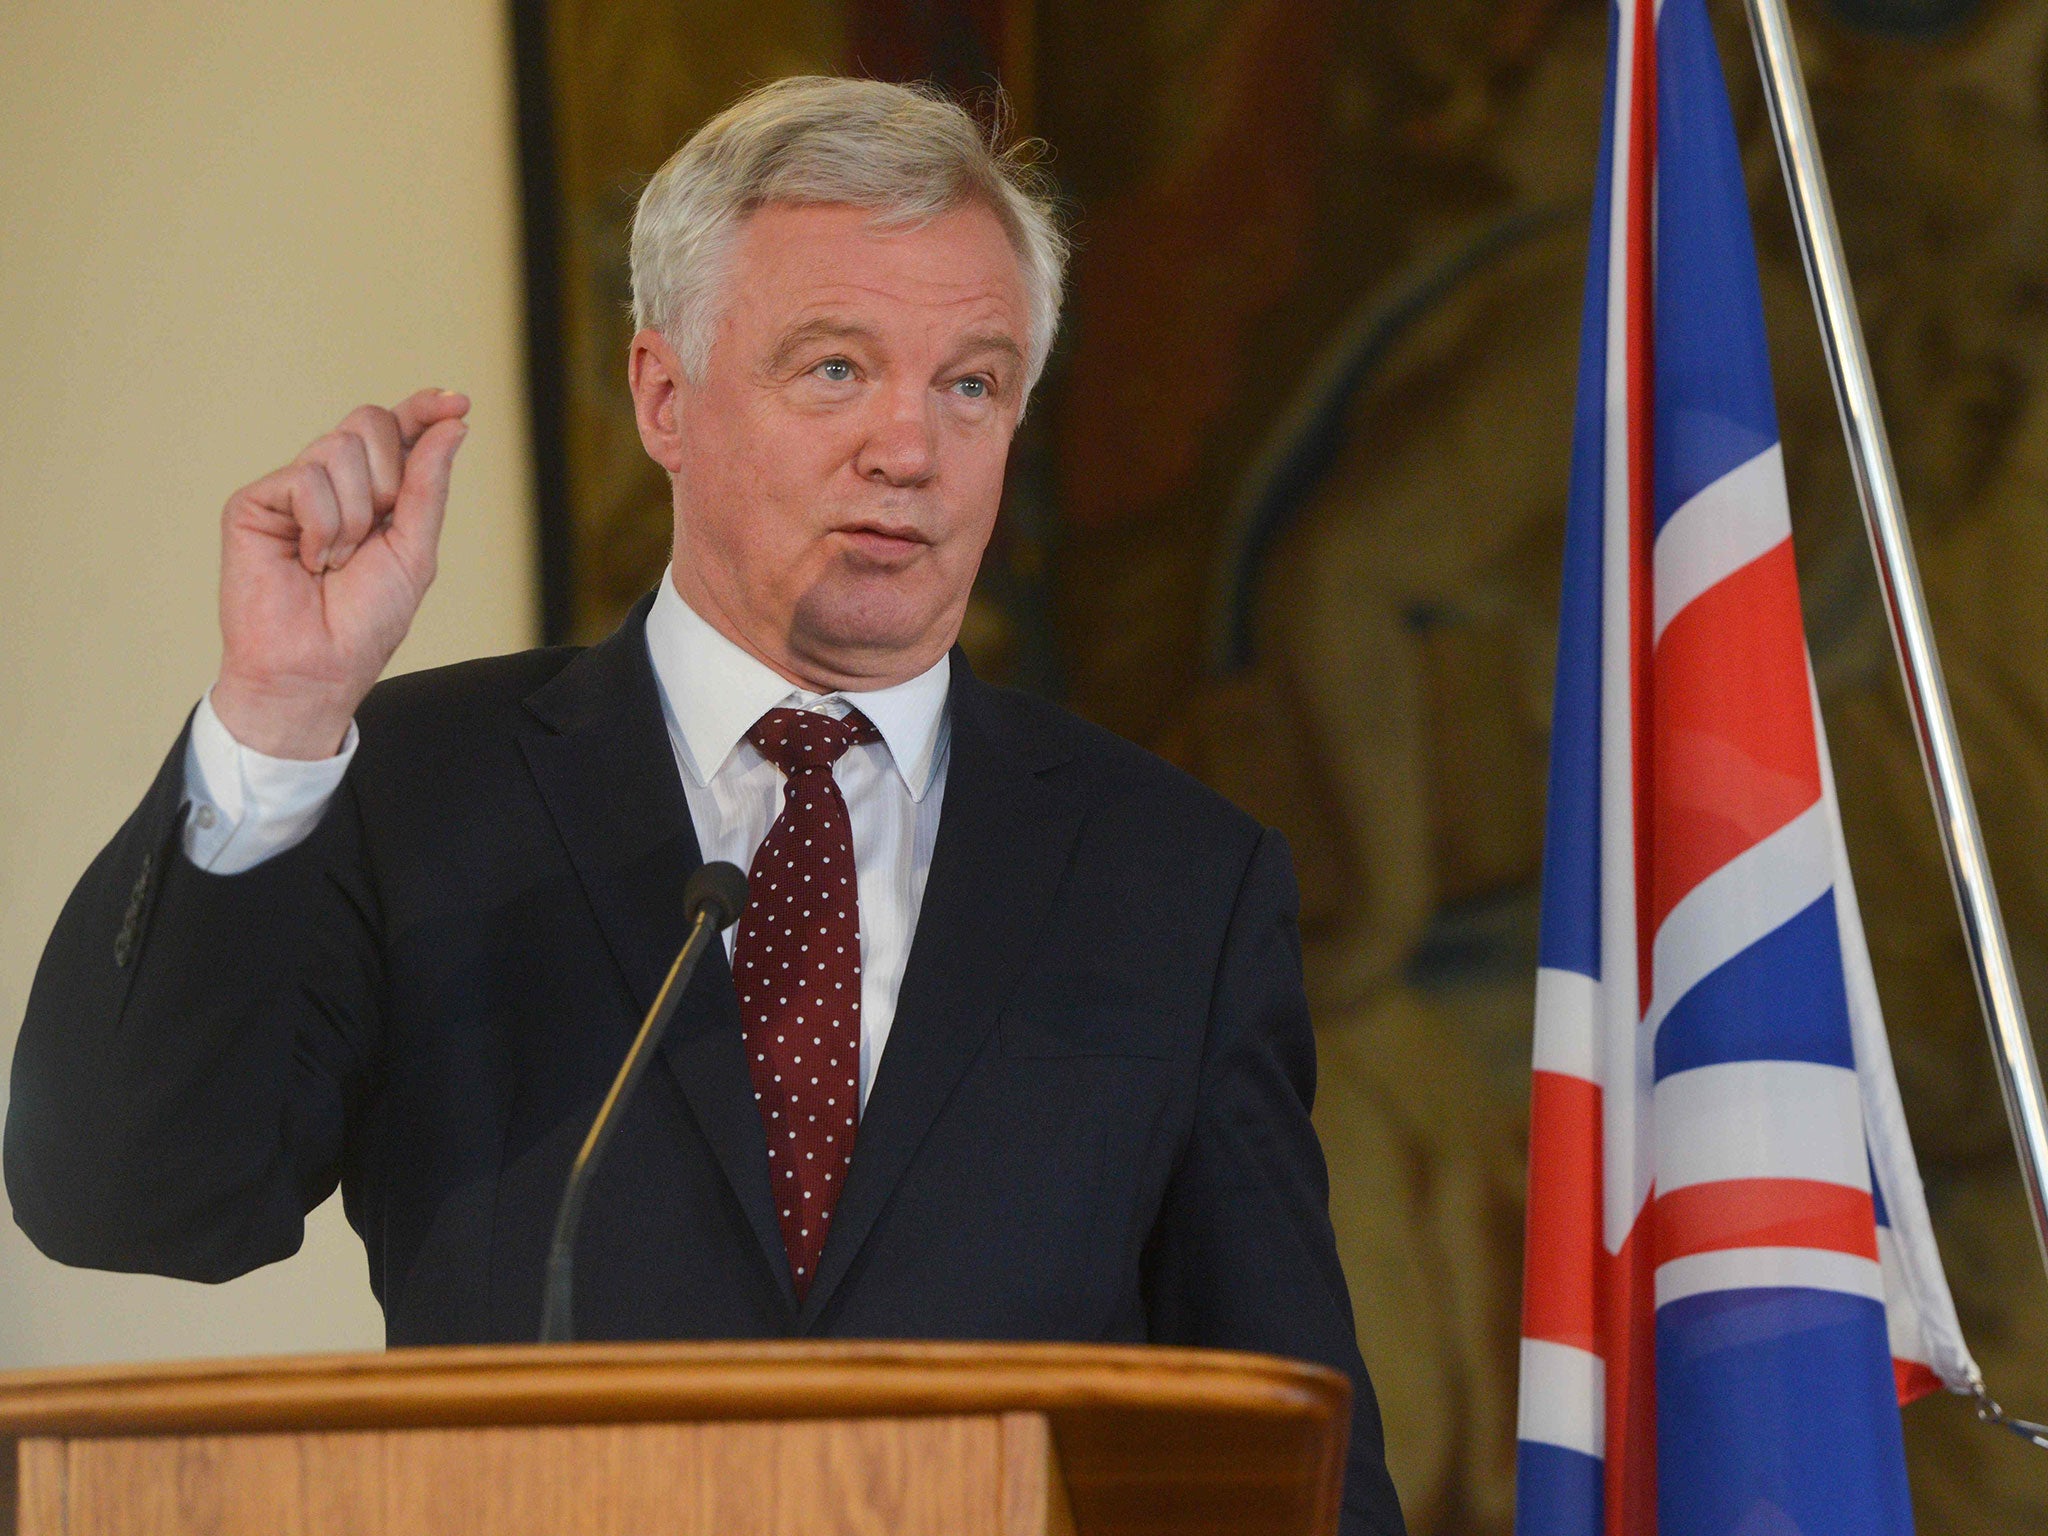 Brexit Secretary David Davis had the largest portion of support but still failed to win 20 per cent backing